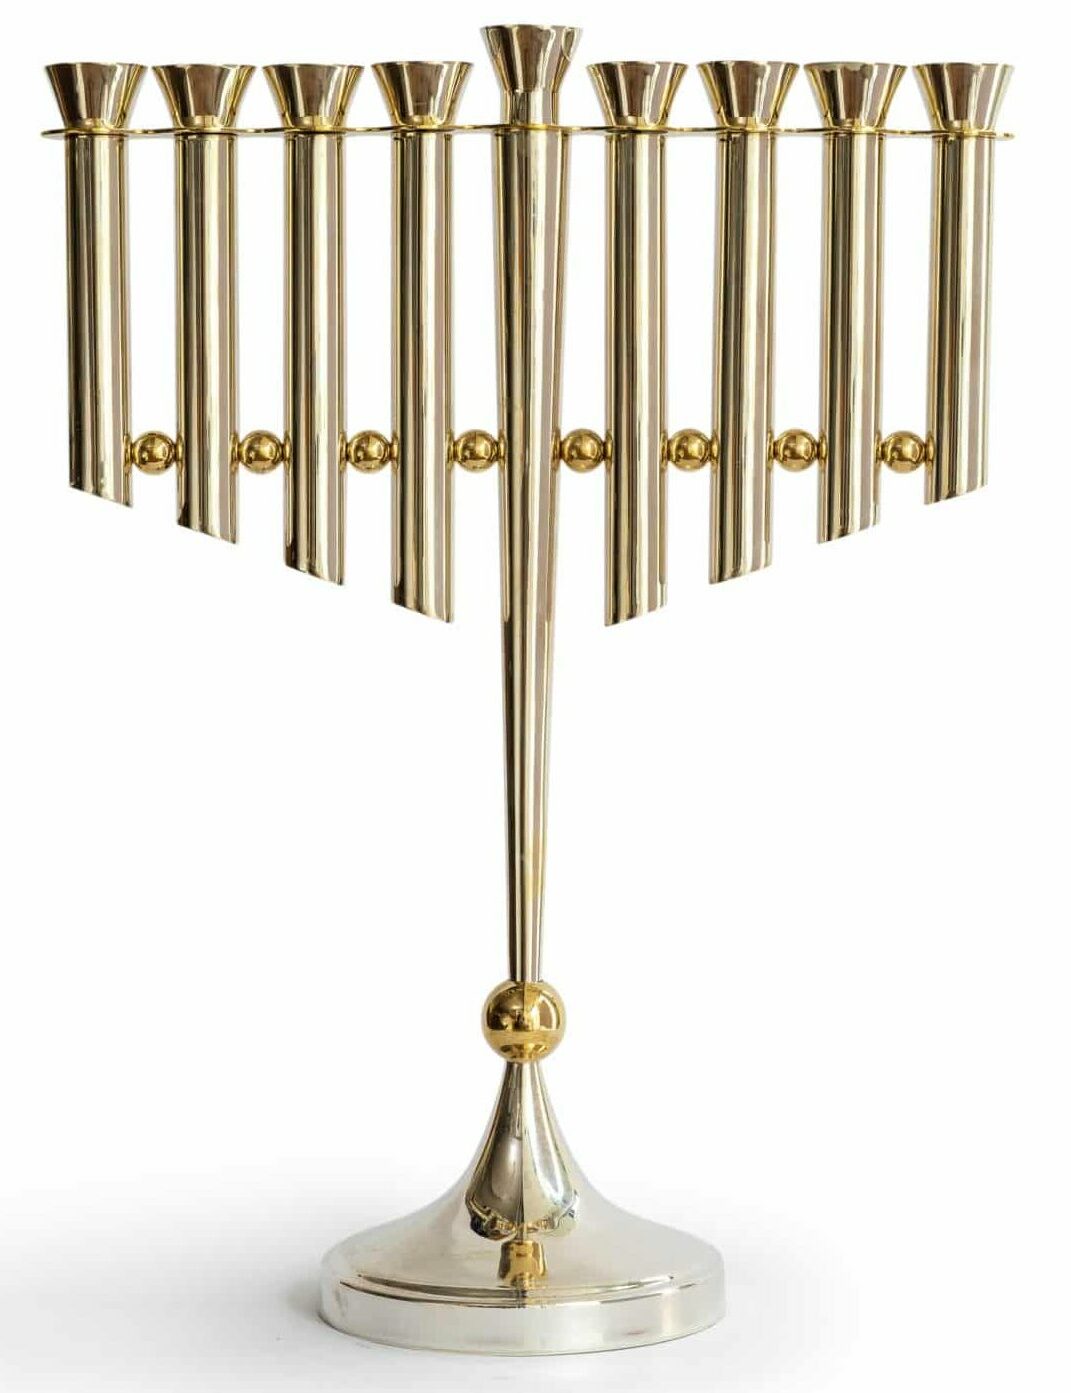 Unique and Large Chabad Menorah from Silver and Gold